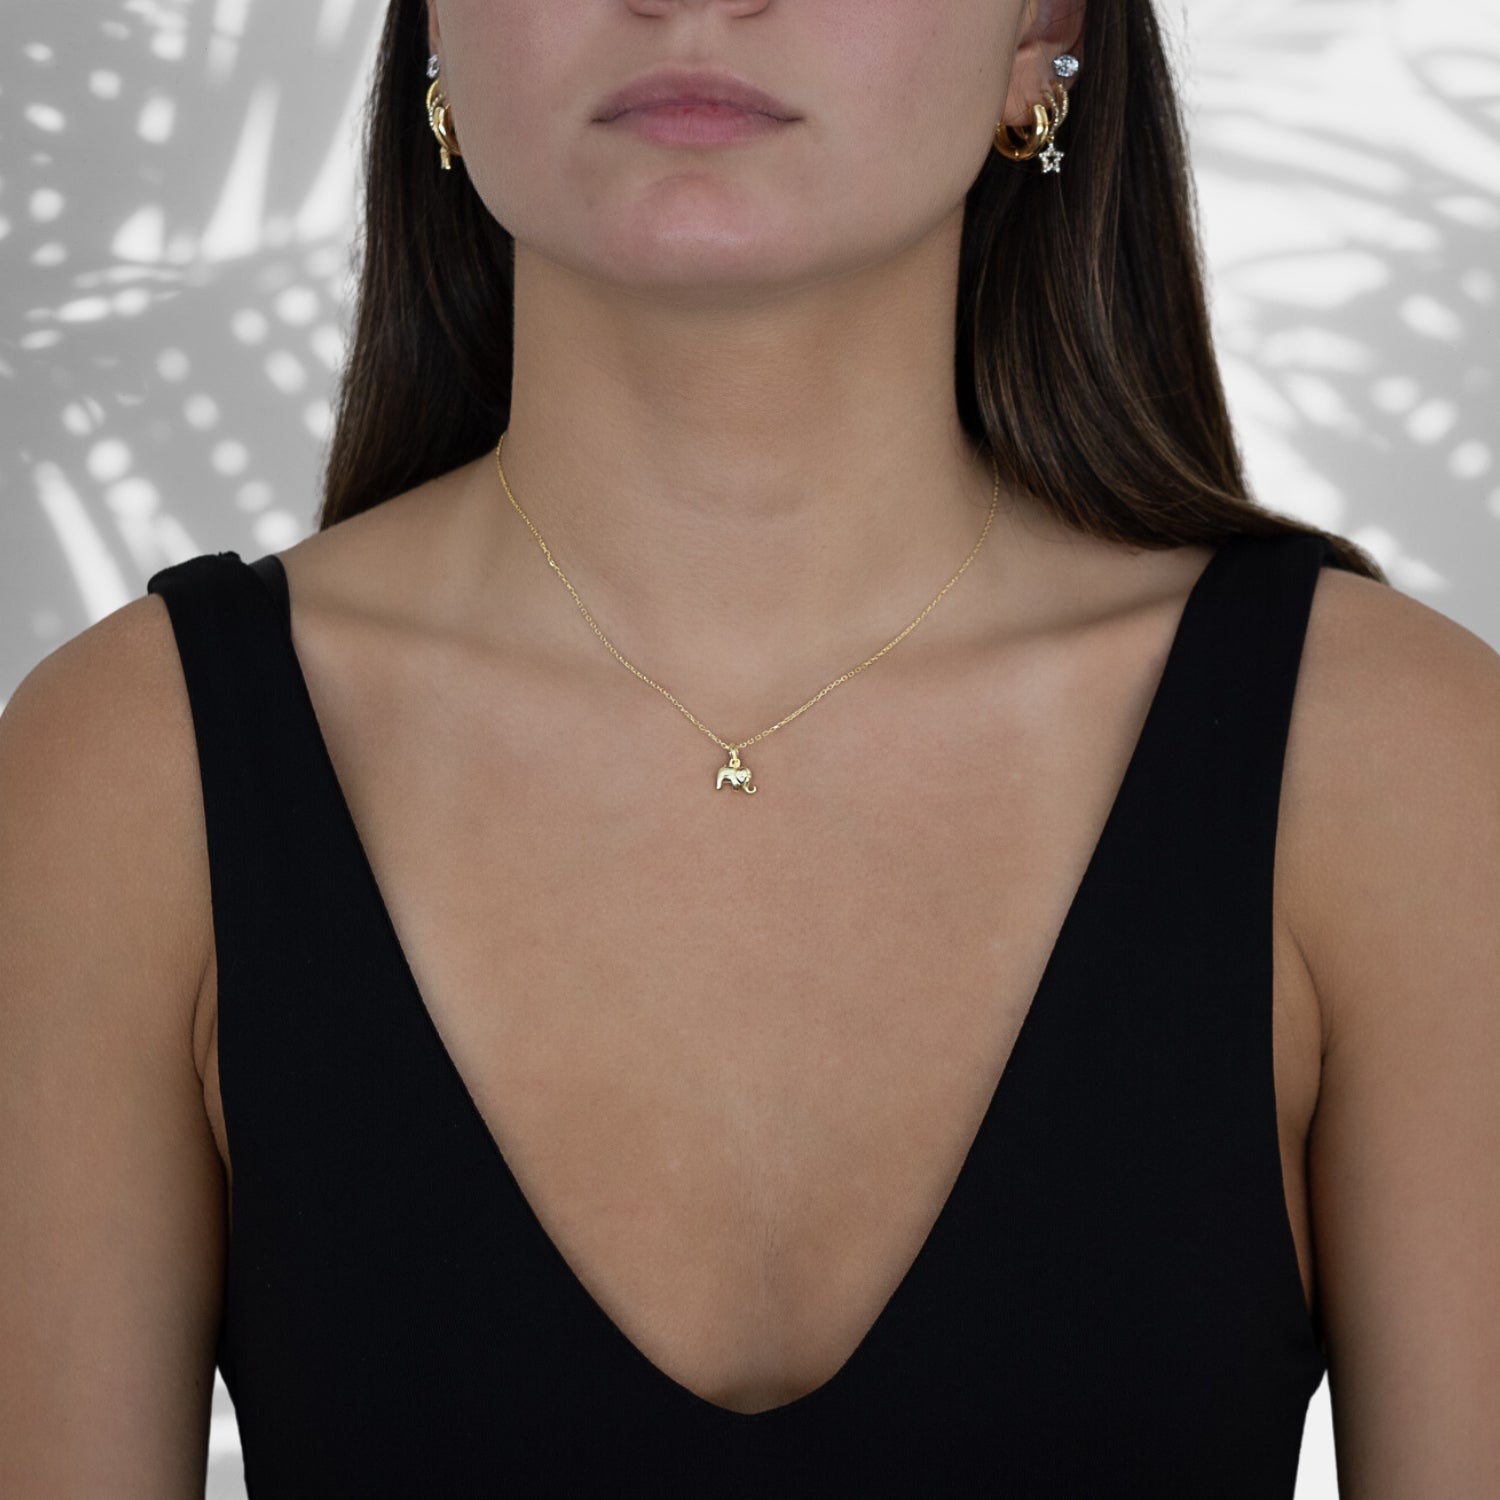 The Dainty Gold Elephant Necklace adding a touch of charm and sophistication to the model&#39;s outfit, capturing attention with its symbolic elephant pendant.